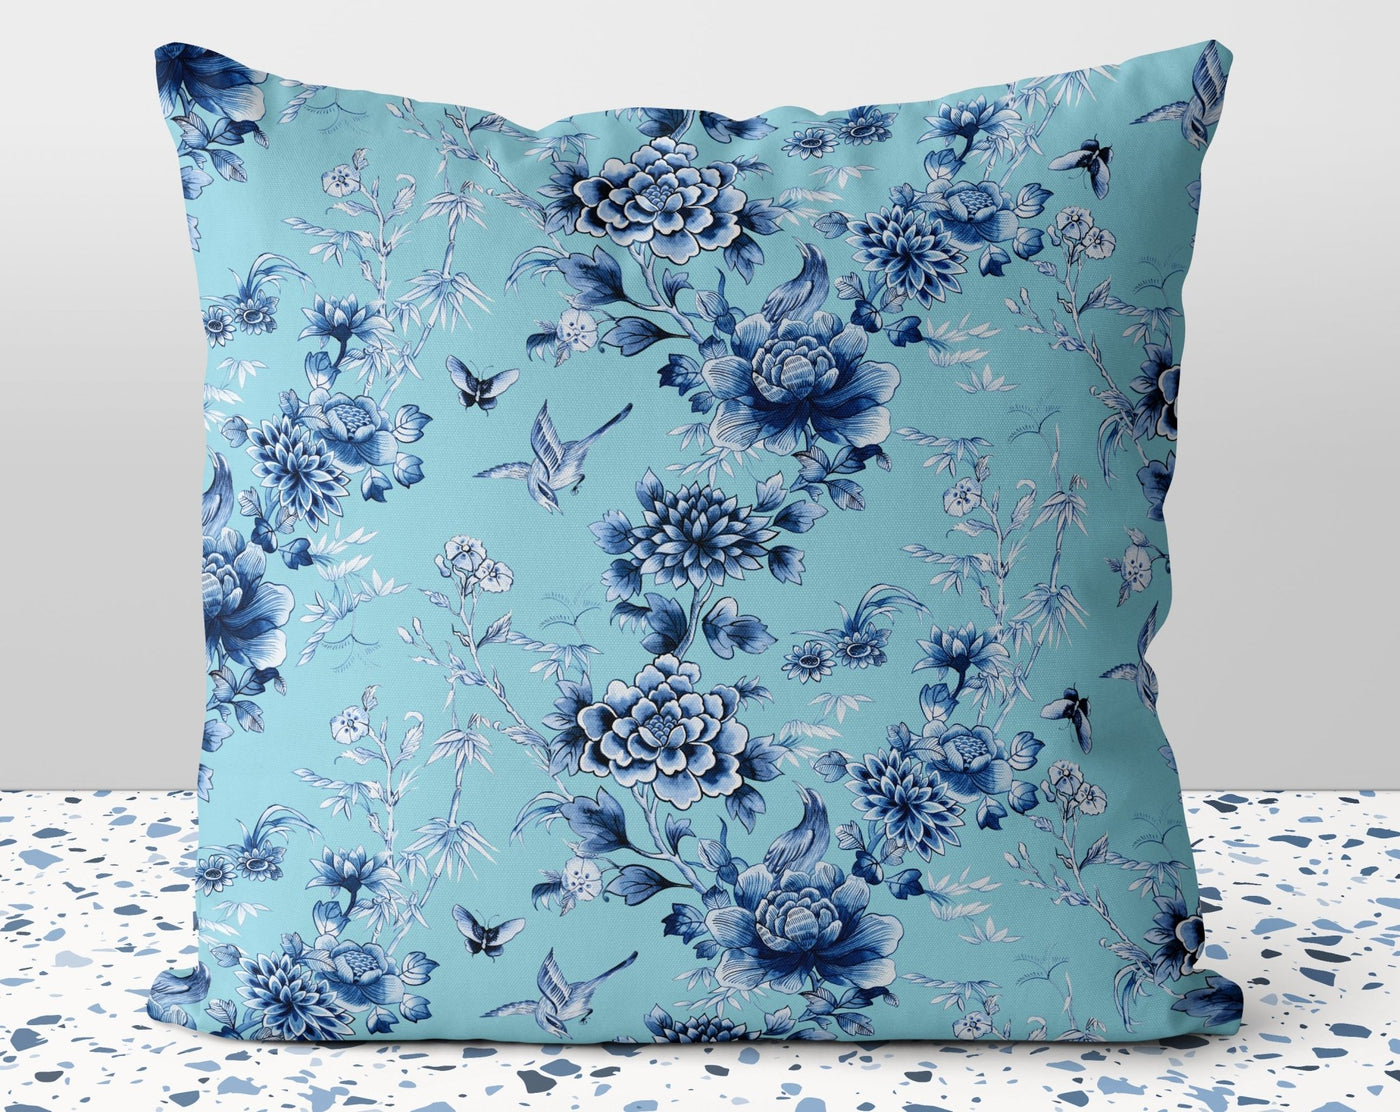 Floral Chinoiserie Flowers Baby Blue on Blue Square Pillow with Cover Throw with Insert - Cush Potato Pillows